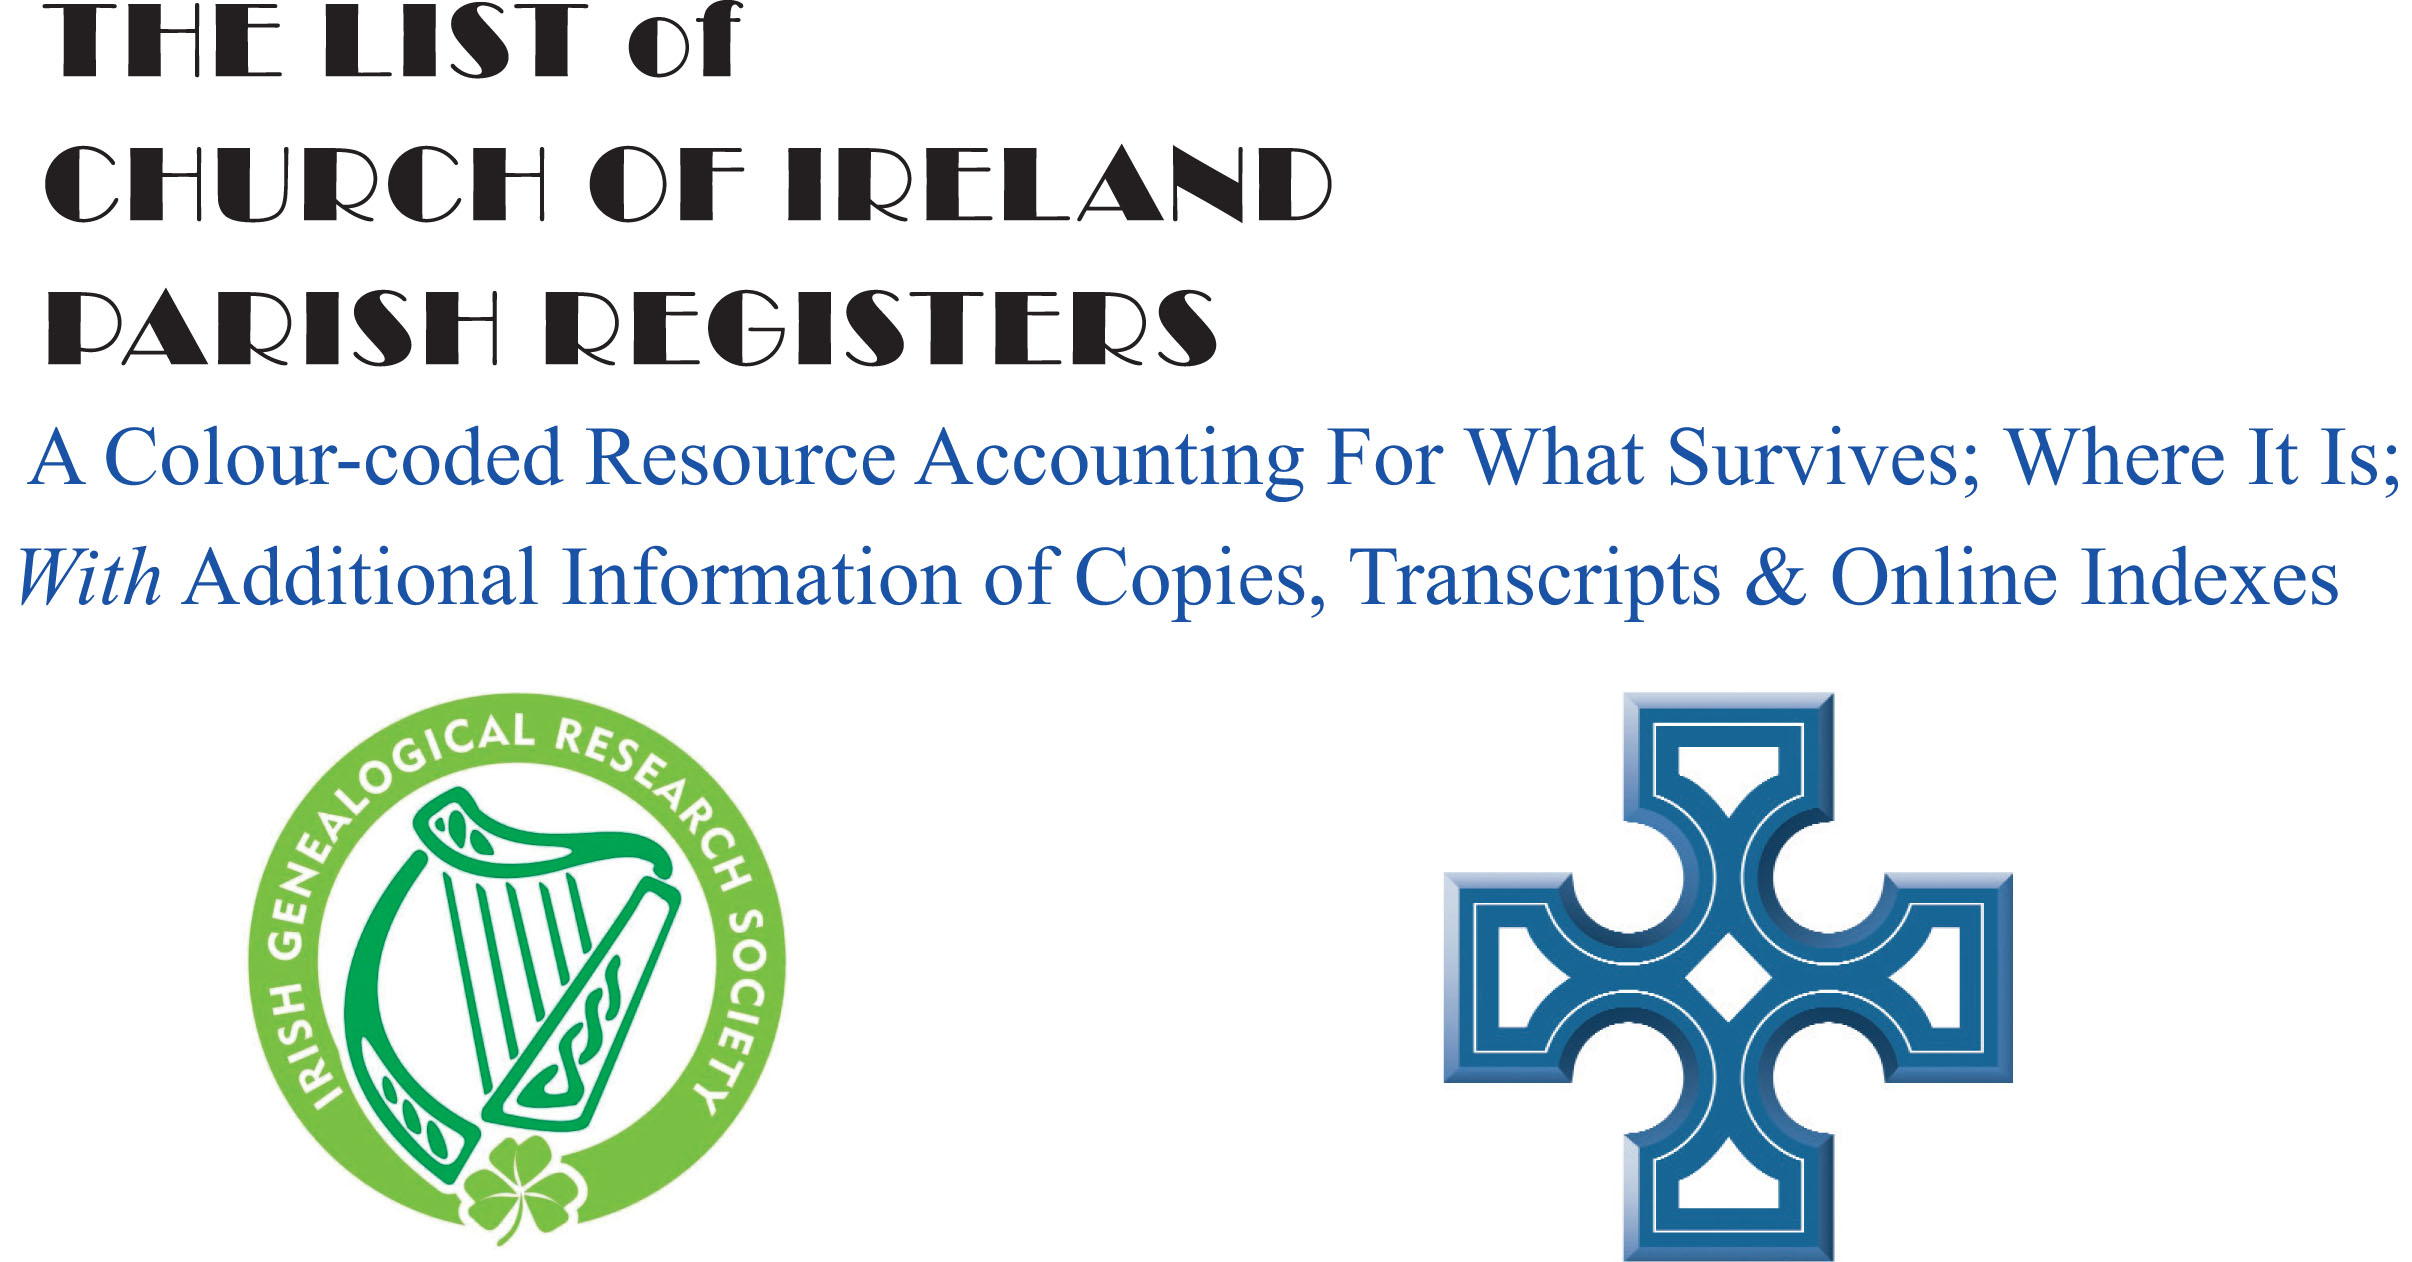 The title page for the online colour-coded List of Church of Ireland Parish Registers.